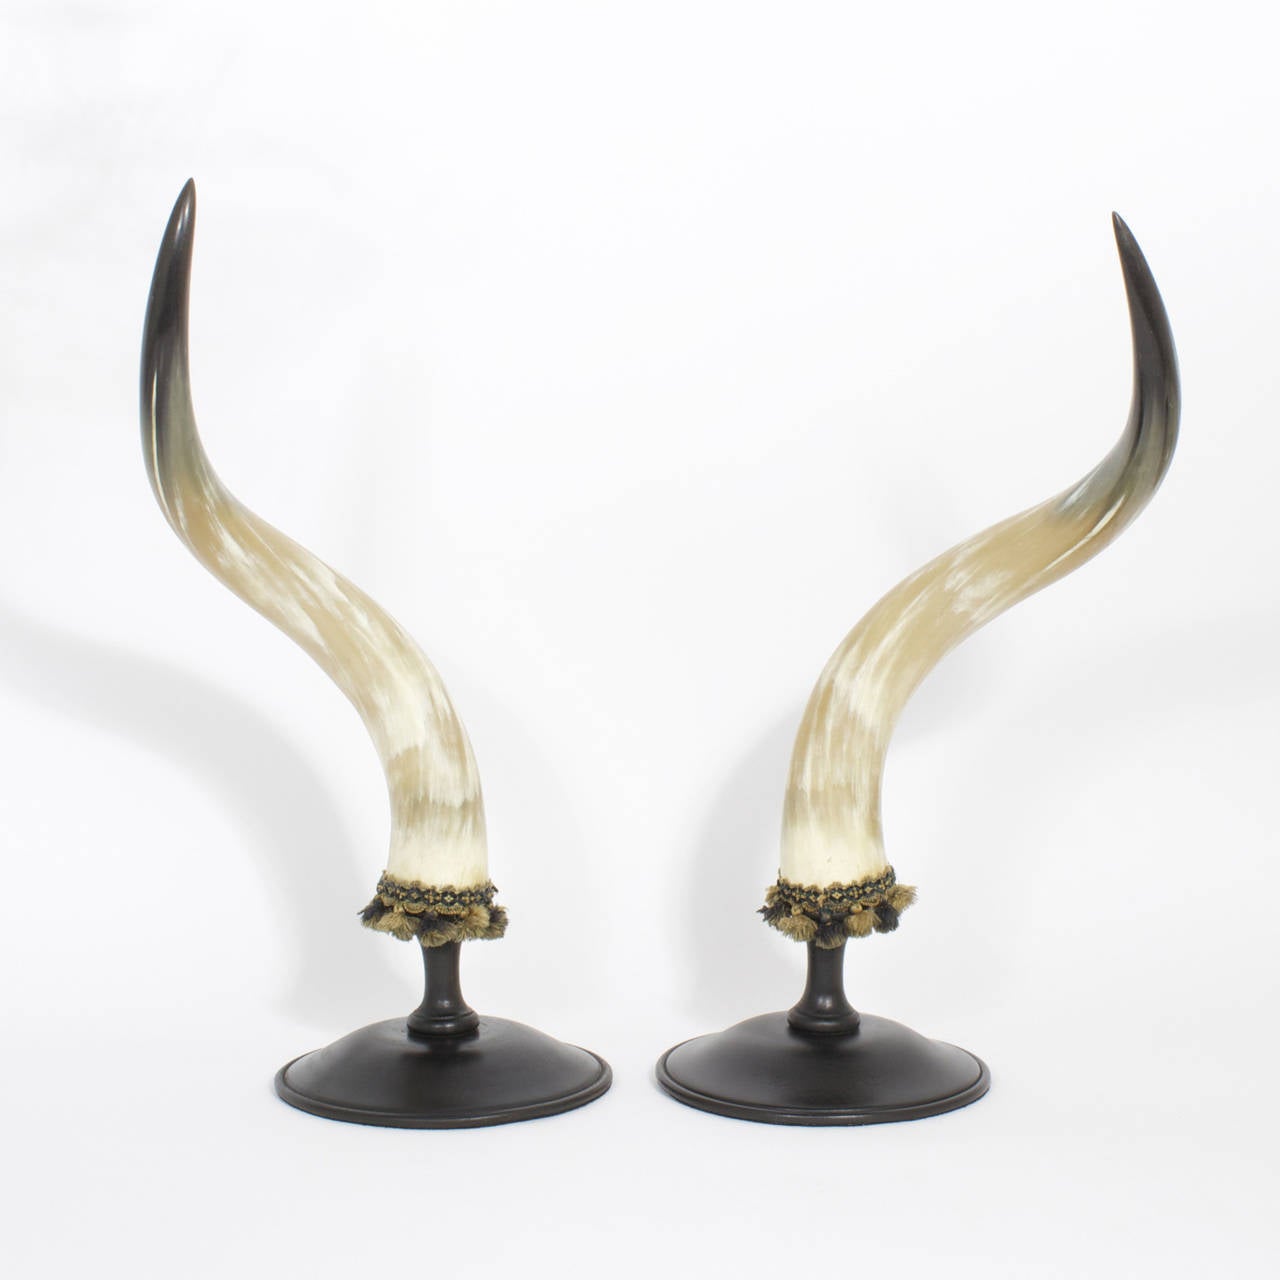 Large and formidable pair of steer or bull horns with bold dramatic form and polished to a sophisticated glow, trimmed with tassels and mounted on ebonized wood classical bases. As occurs in nature, one horn is an inch shorter. The measurements